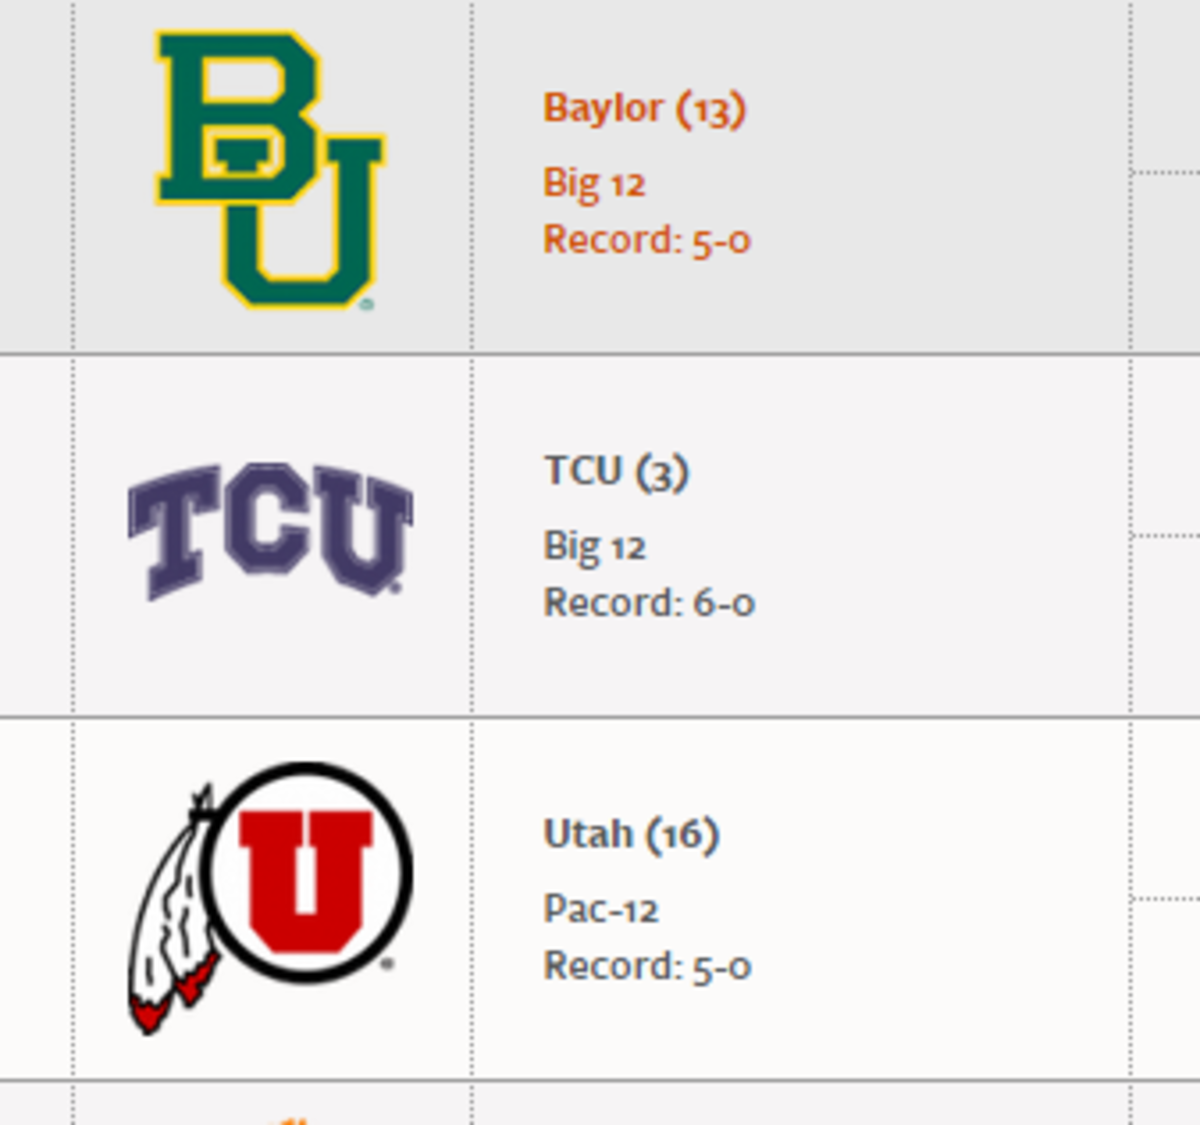 AP poll for the top teams in CFB featuring Baylor, TCU, and Utah.